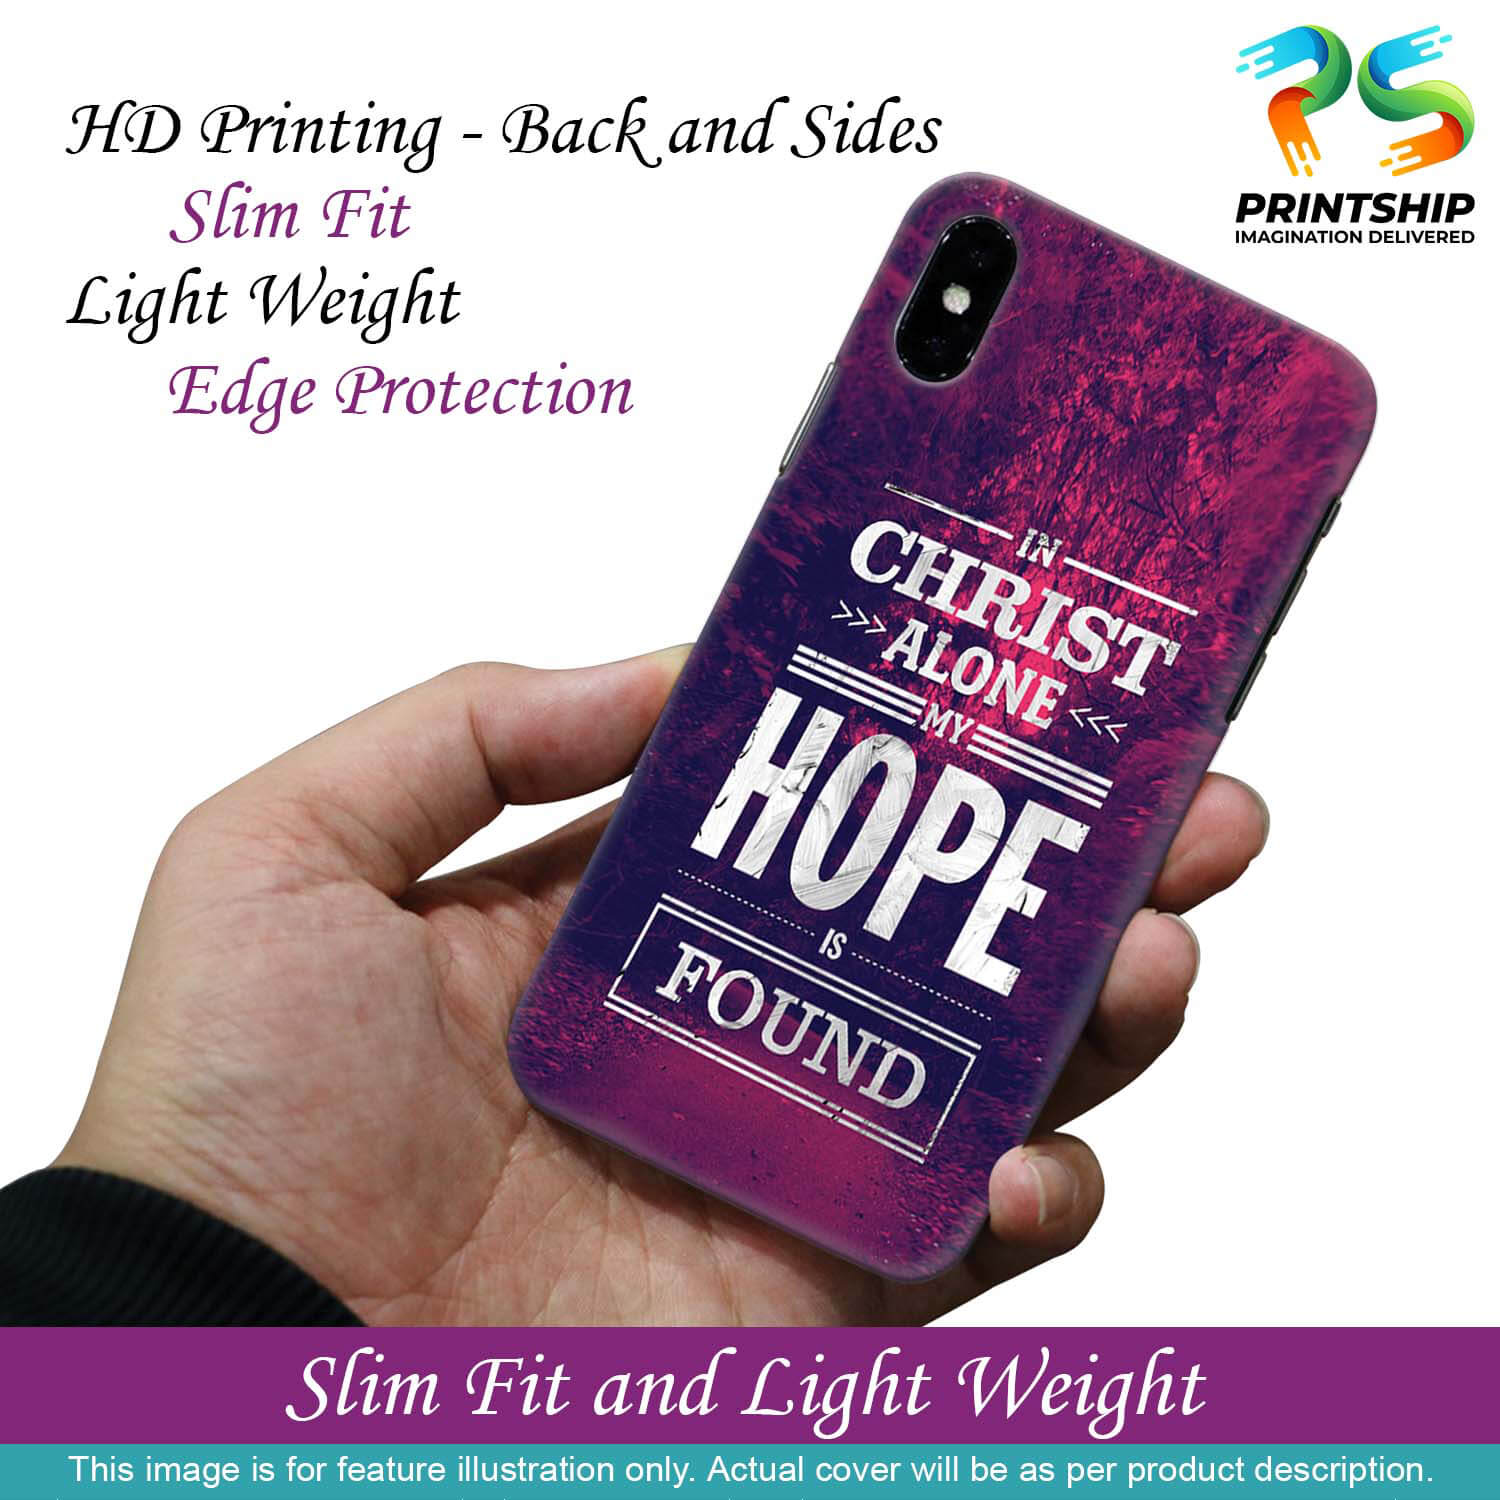 D2208-In Christ I Find Hope Back Cover for Oppo A52